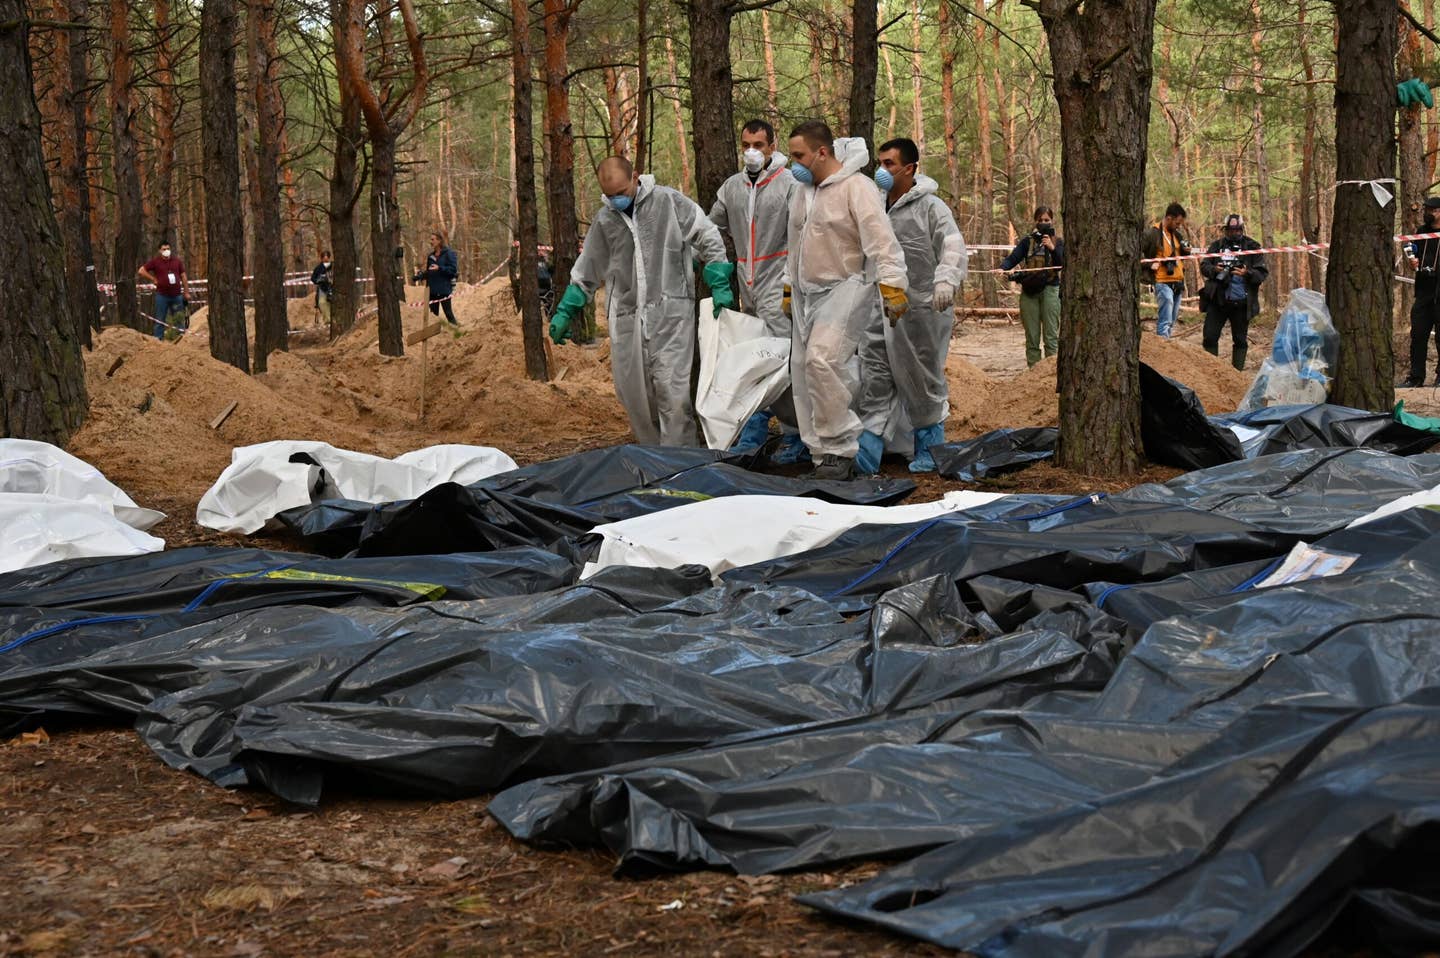 Forensics carry body bags in a forest near Izyum, eastern Ukraine, on September 19, 2022, where Ukrainian investigators have uncovered more than 440 graves after the city was recaptured from the Russians, bringing fresh claims of Russian atrocities. (Photo by SERGEY BOBOK/AFP via Getty Images)